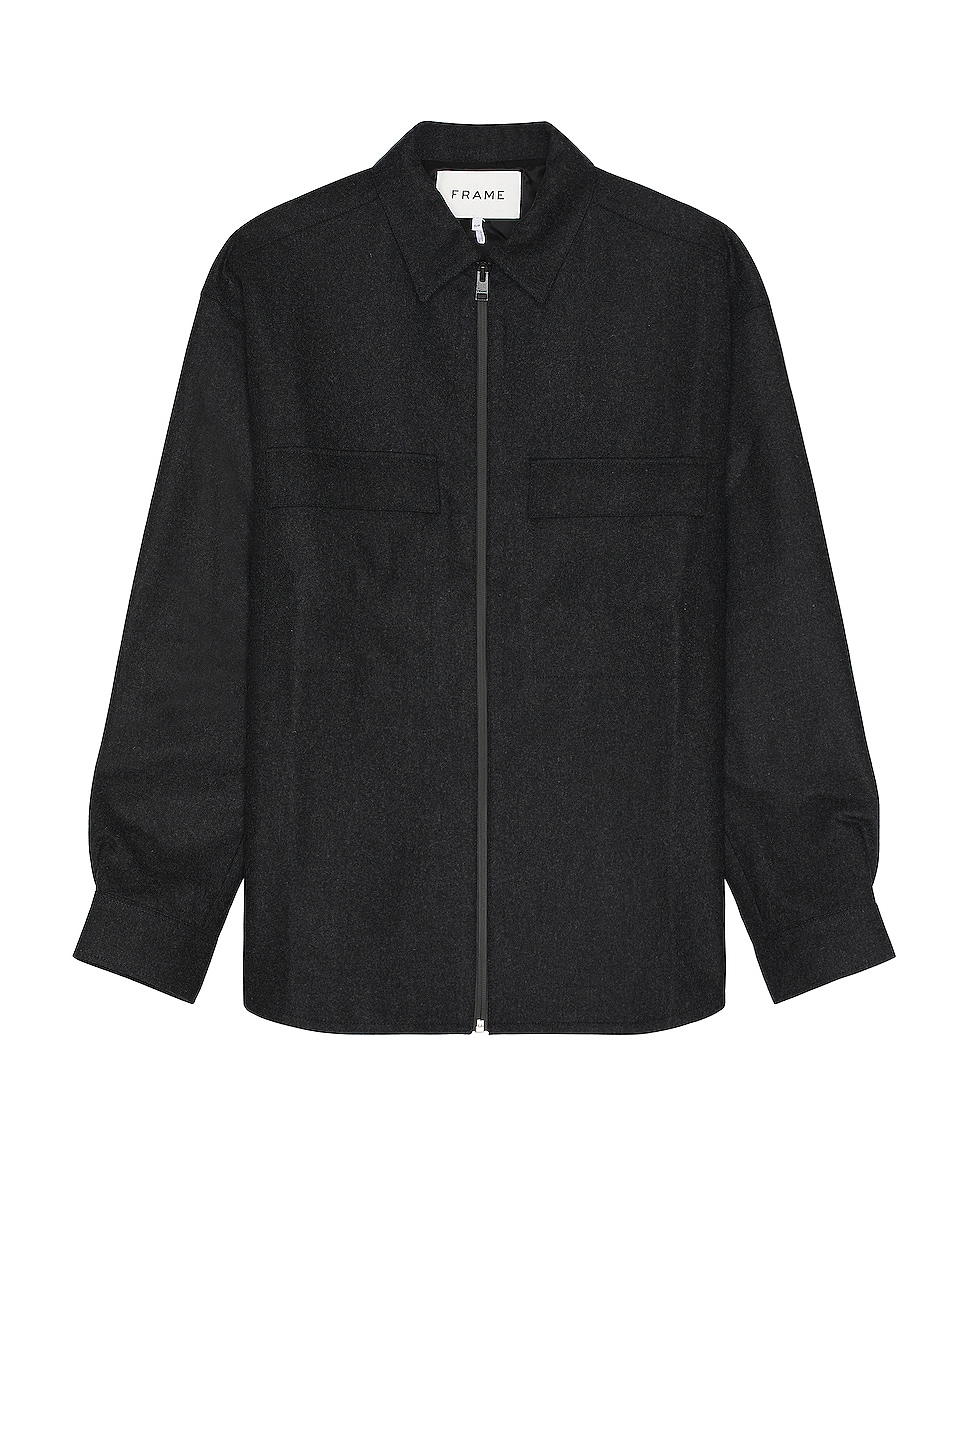 Image 1 of FRAME Modern Zip Shirt in Charcoal Grey